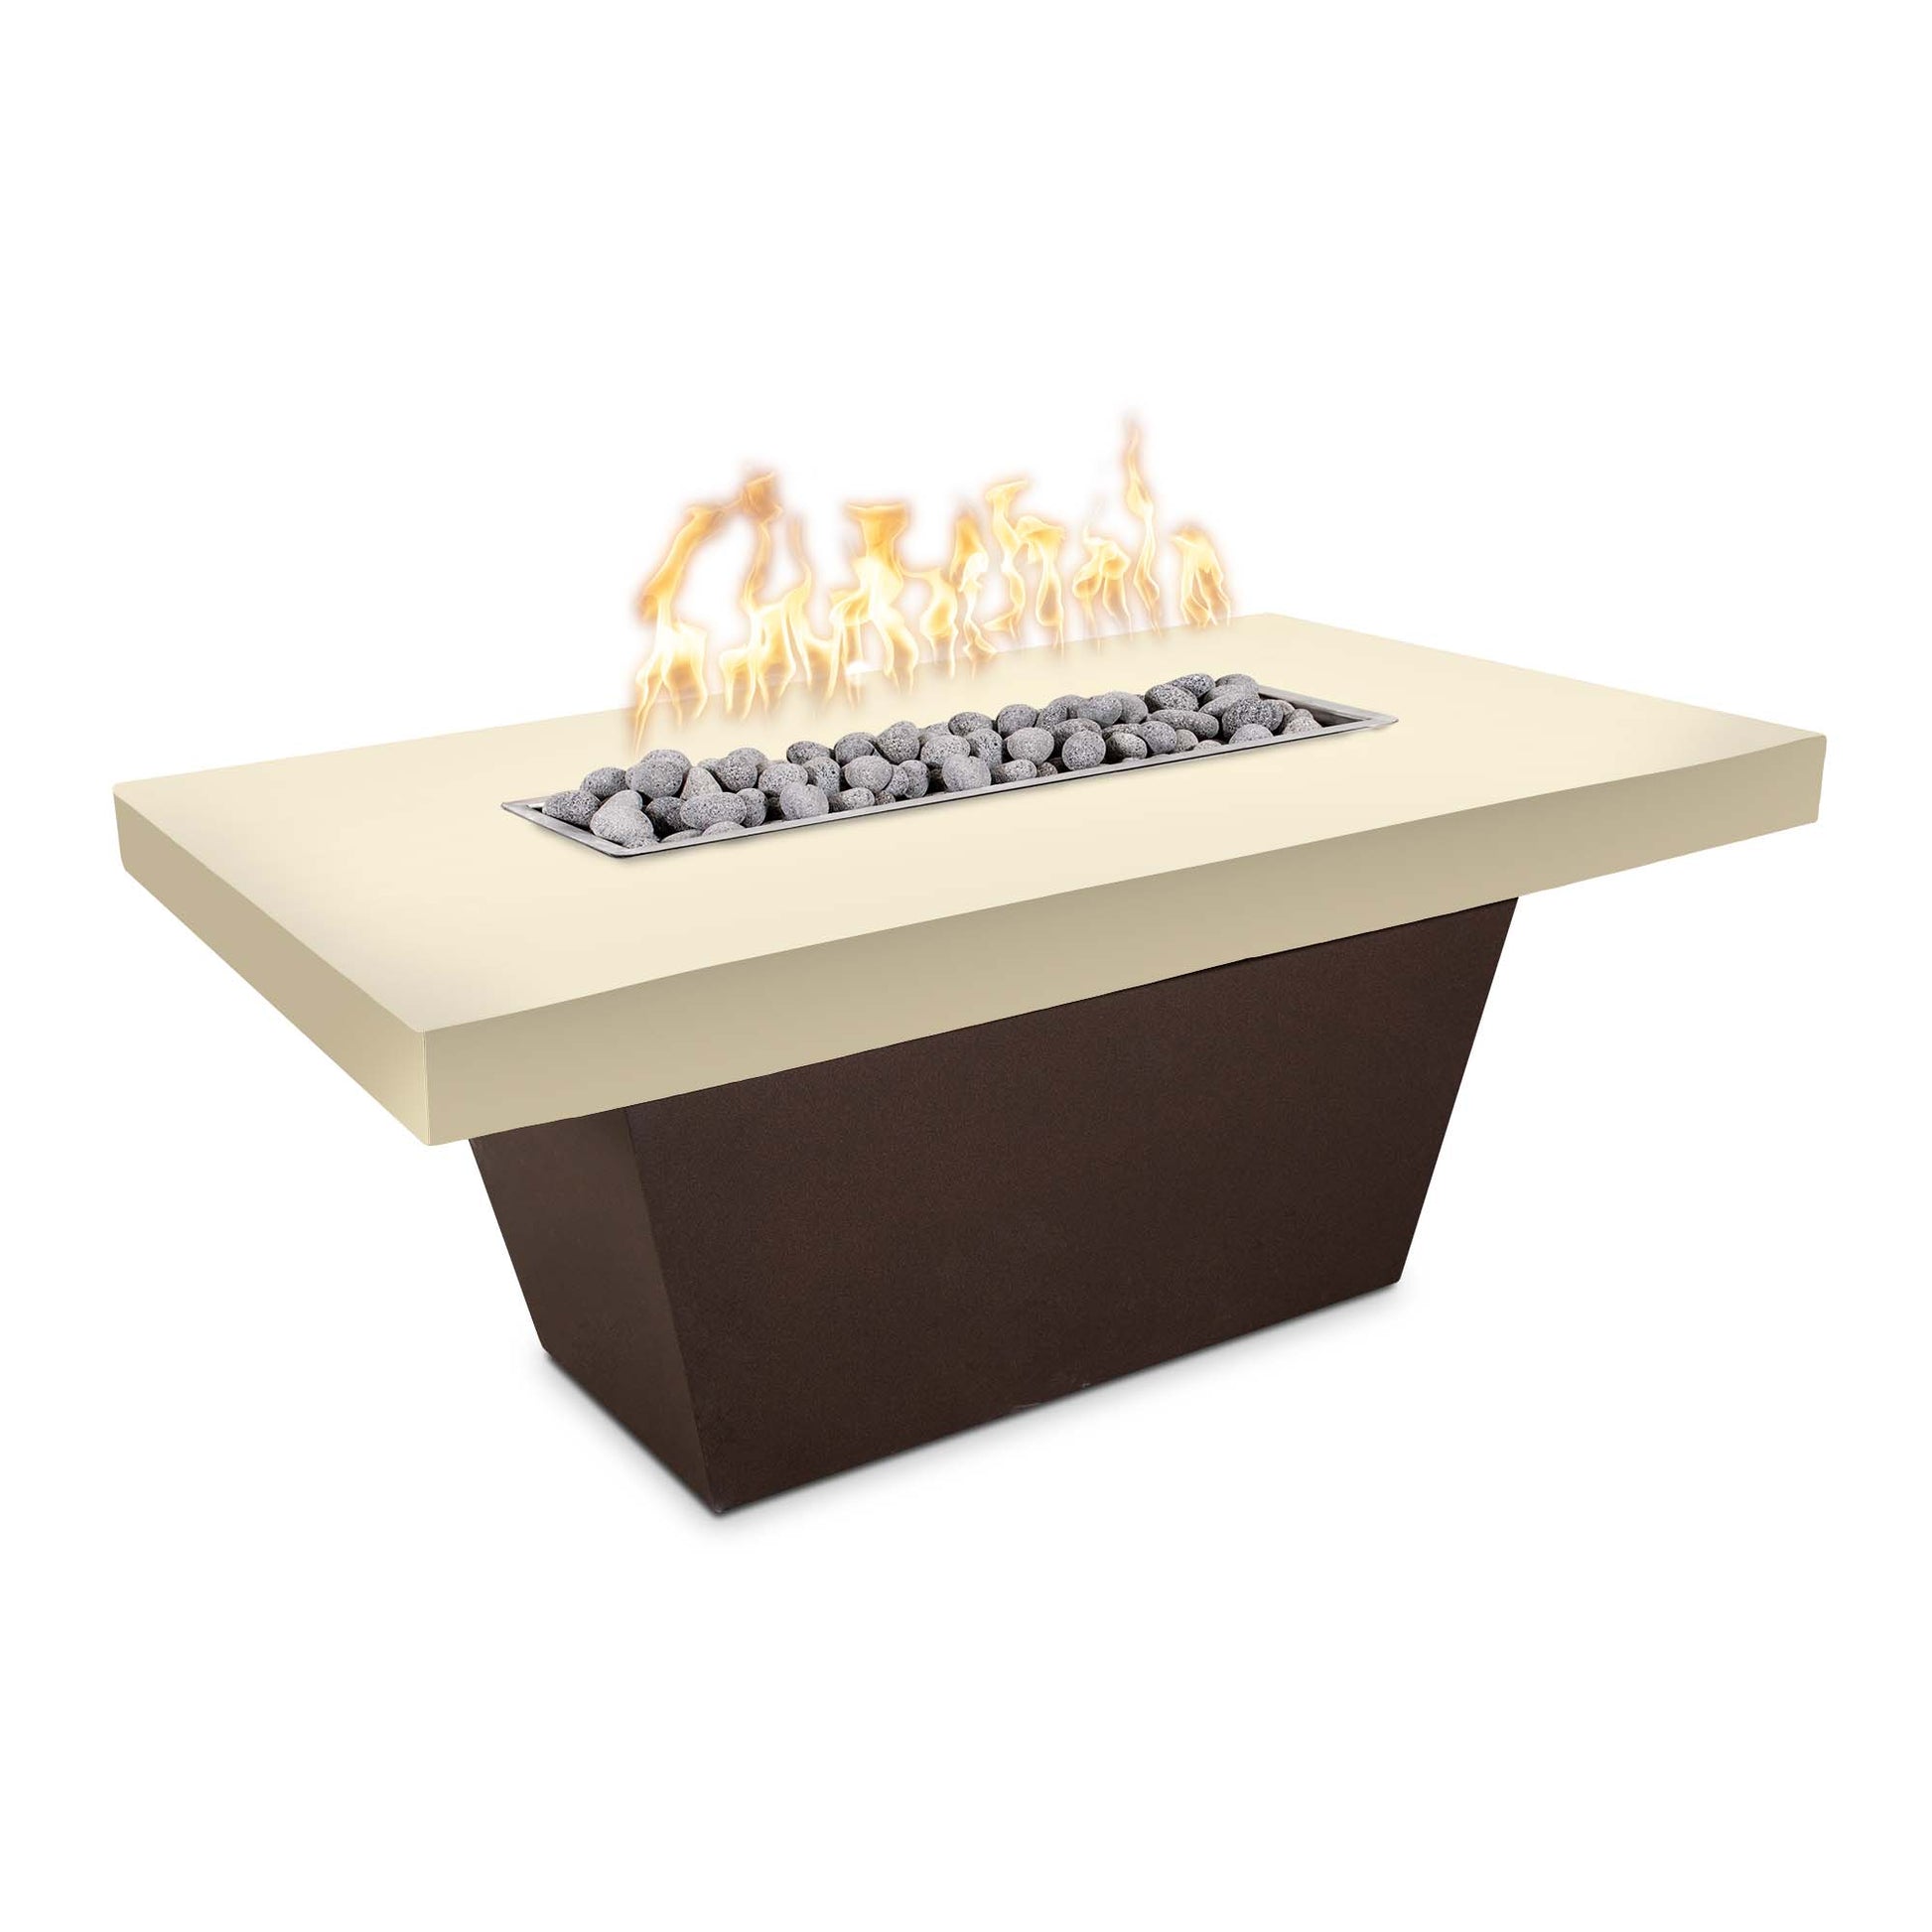 The Outdoor Plus Tacoma 48" Rustic Coffee Concrete Top & Java Powder Coated Base Liquid Propane Fire Table with Match Lit Ignition